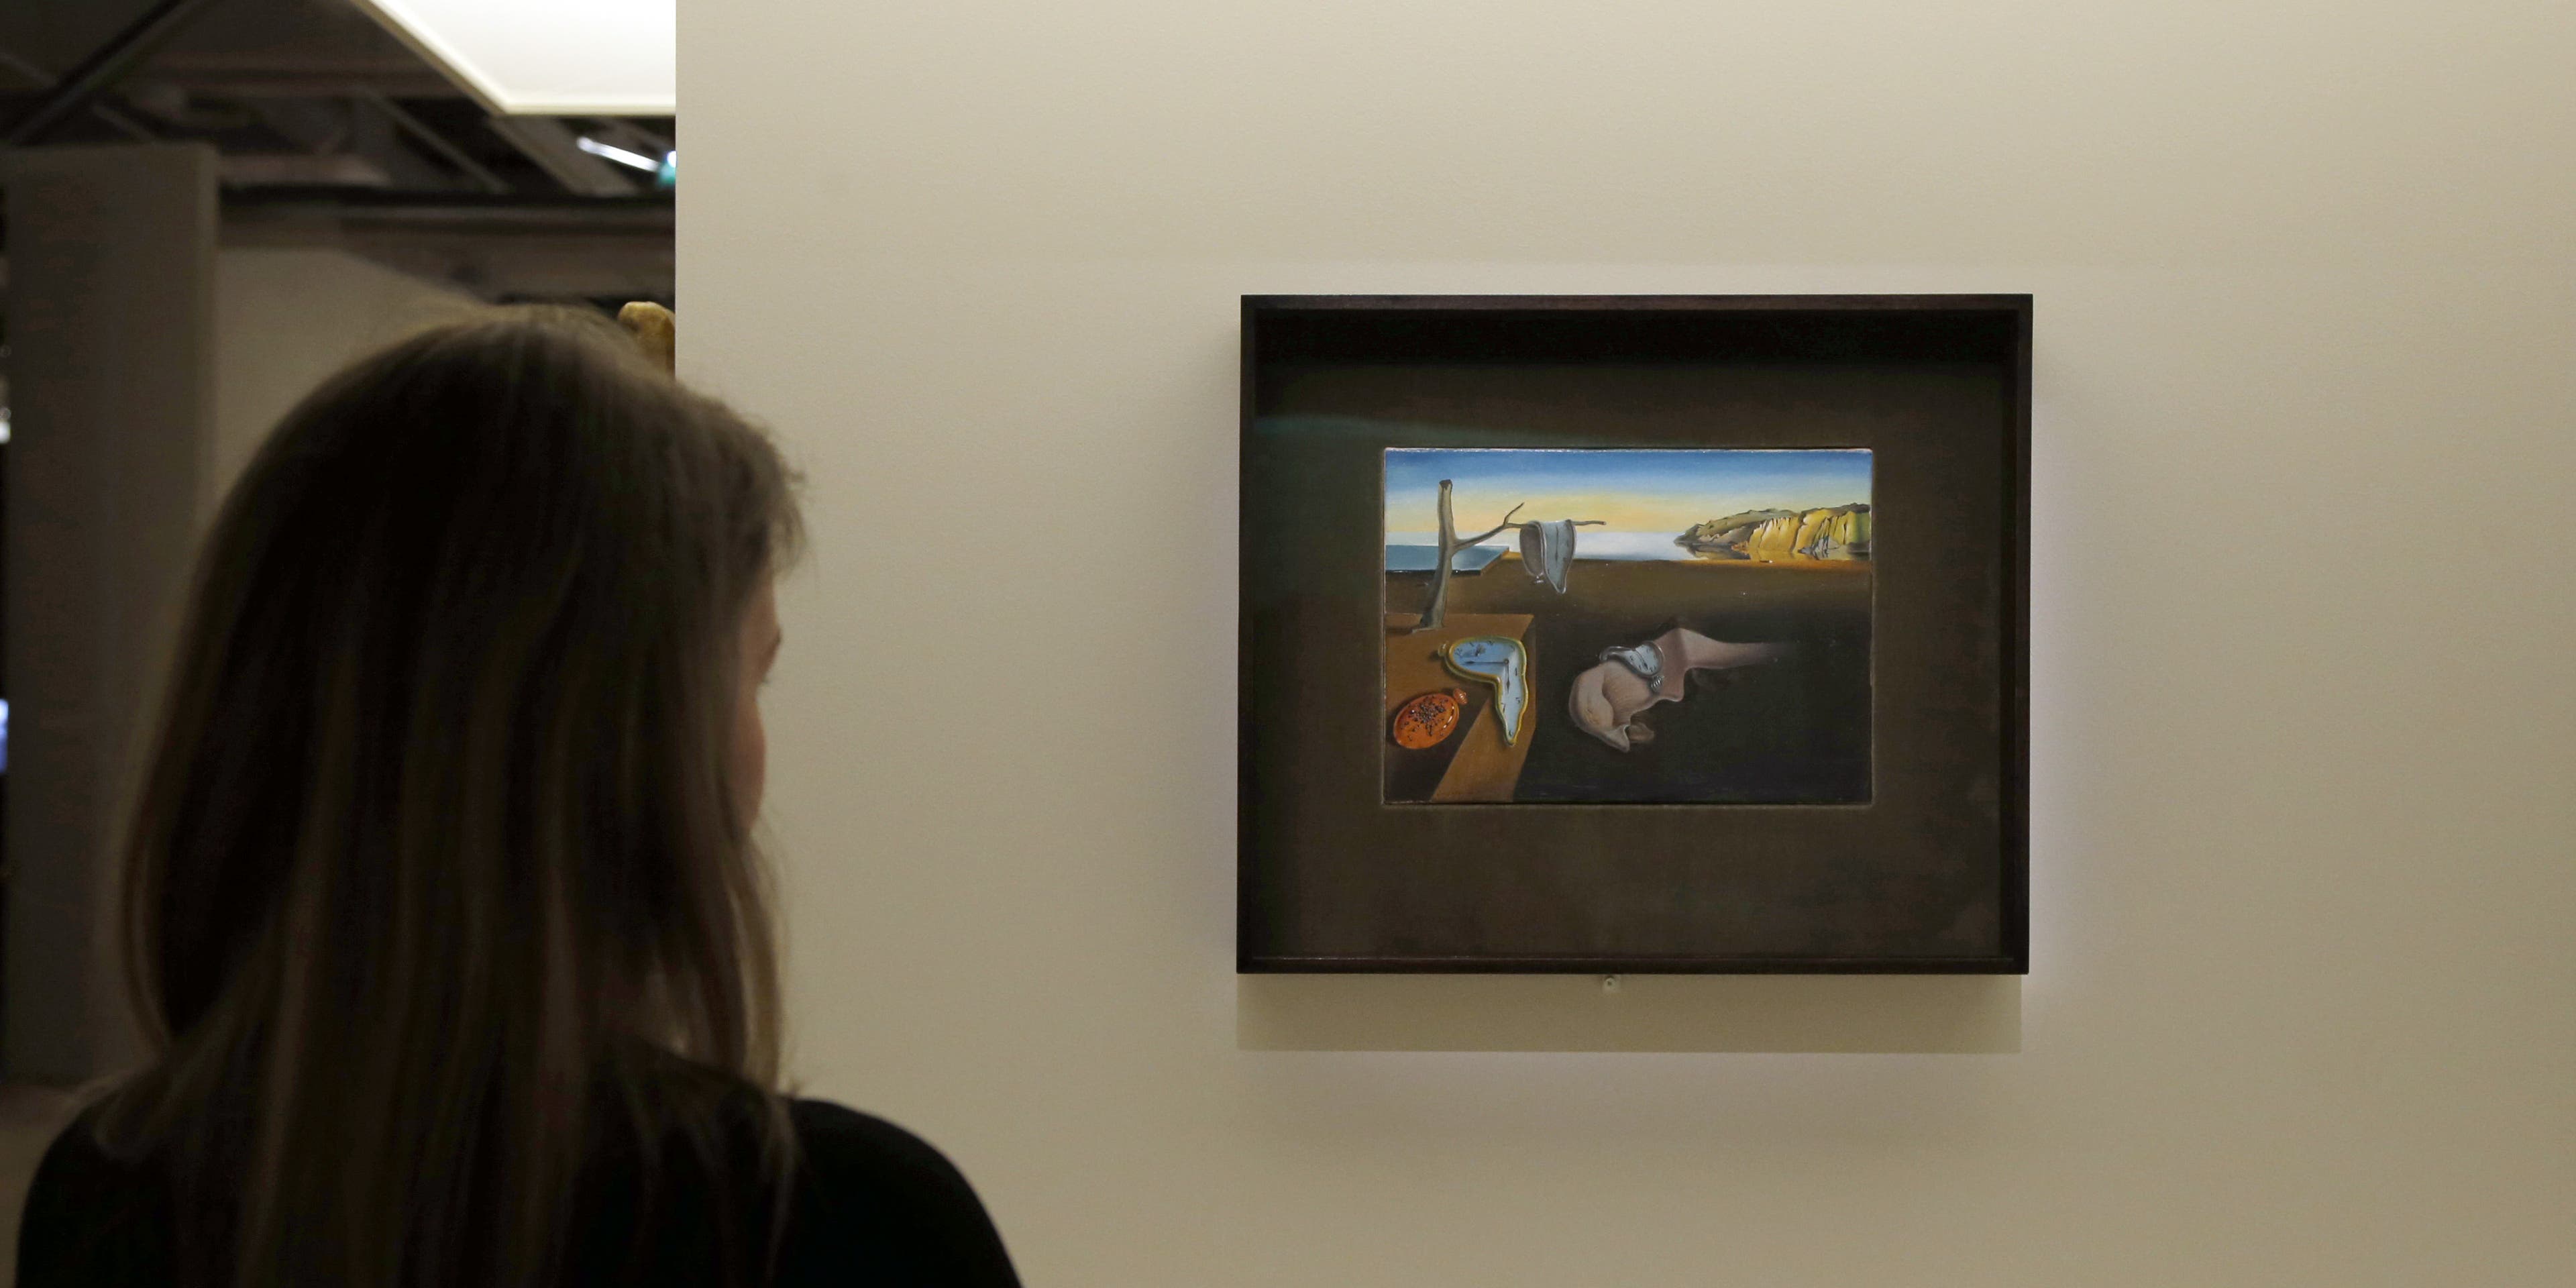 A visitor looks at a painting entitled "La persistance de la mémoire" (Persistence of Memory) by Spanish surrealist artist Salvador Dali's during an exhibition devoted to his work at the Centre Pompidou contopary art center (aka Beaubourg) on November 19, 2012 in Paris. More than 30 years after the first retrospective in 1979, the event gathers more than 200 art pieces and runs until March 13, 2013. AFP PHOTO FRANCOIS GUILLOT (Photo credit should read FRANCOIS GUILLOT/AFP via Getty Images)